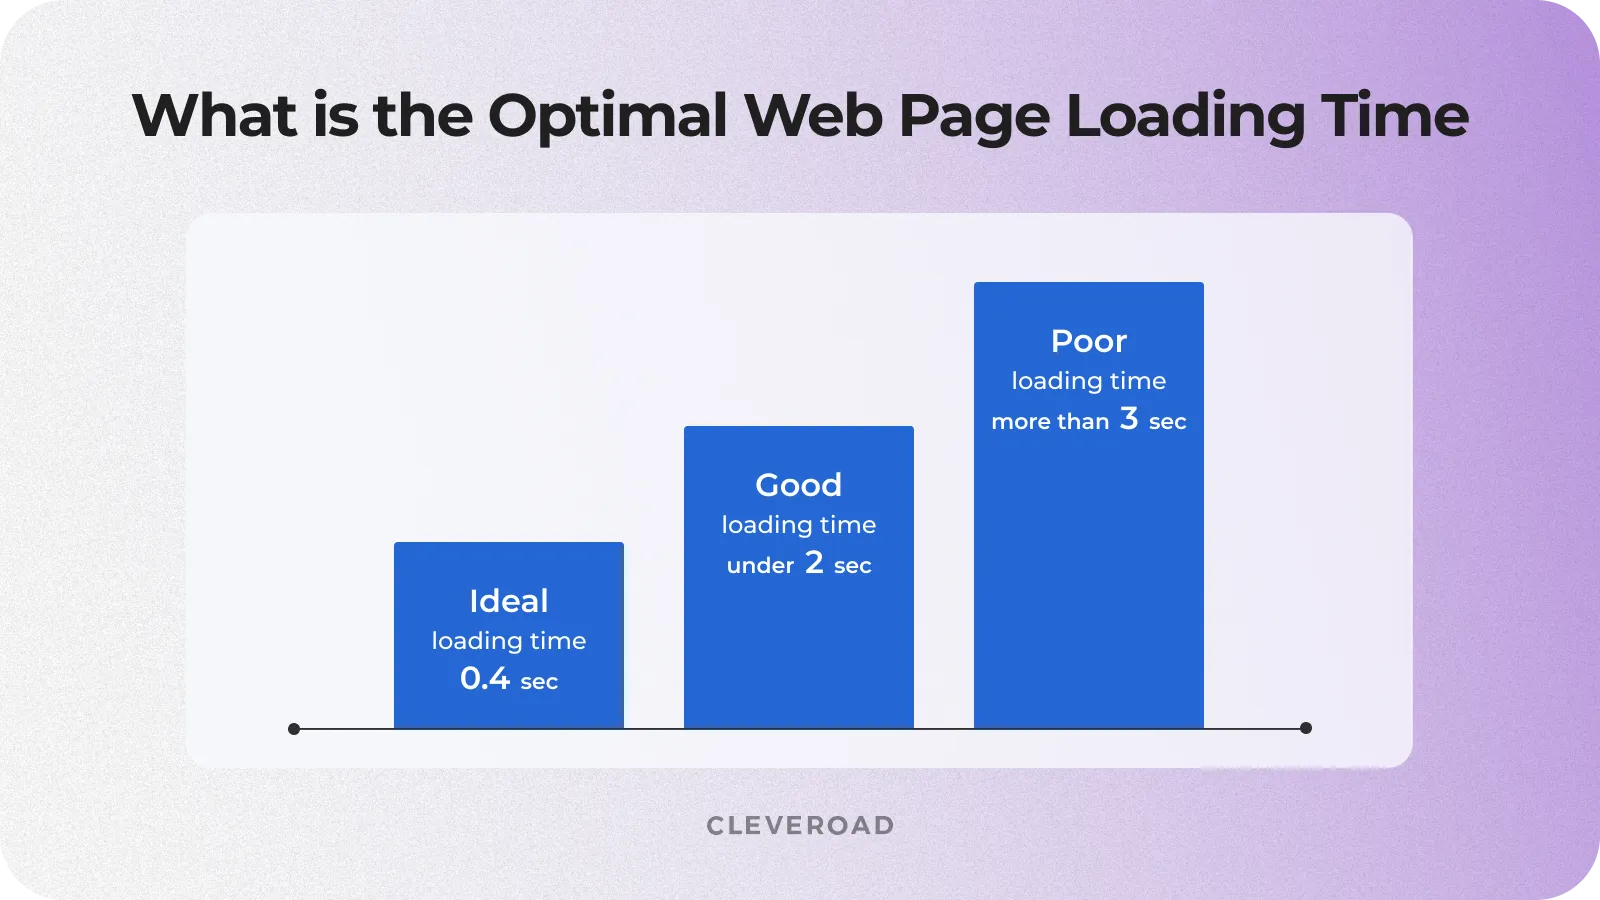 What is the optimal web page loading time?